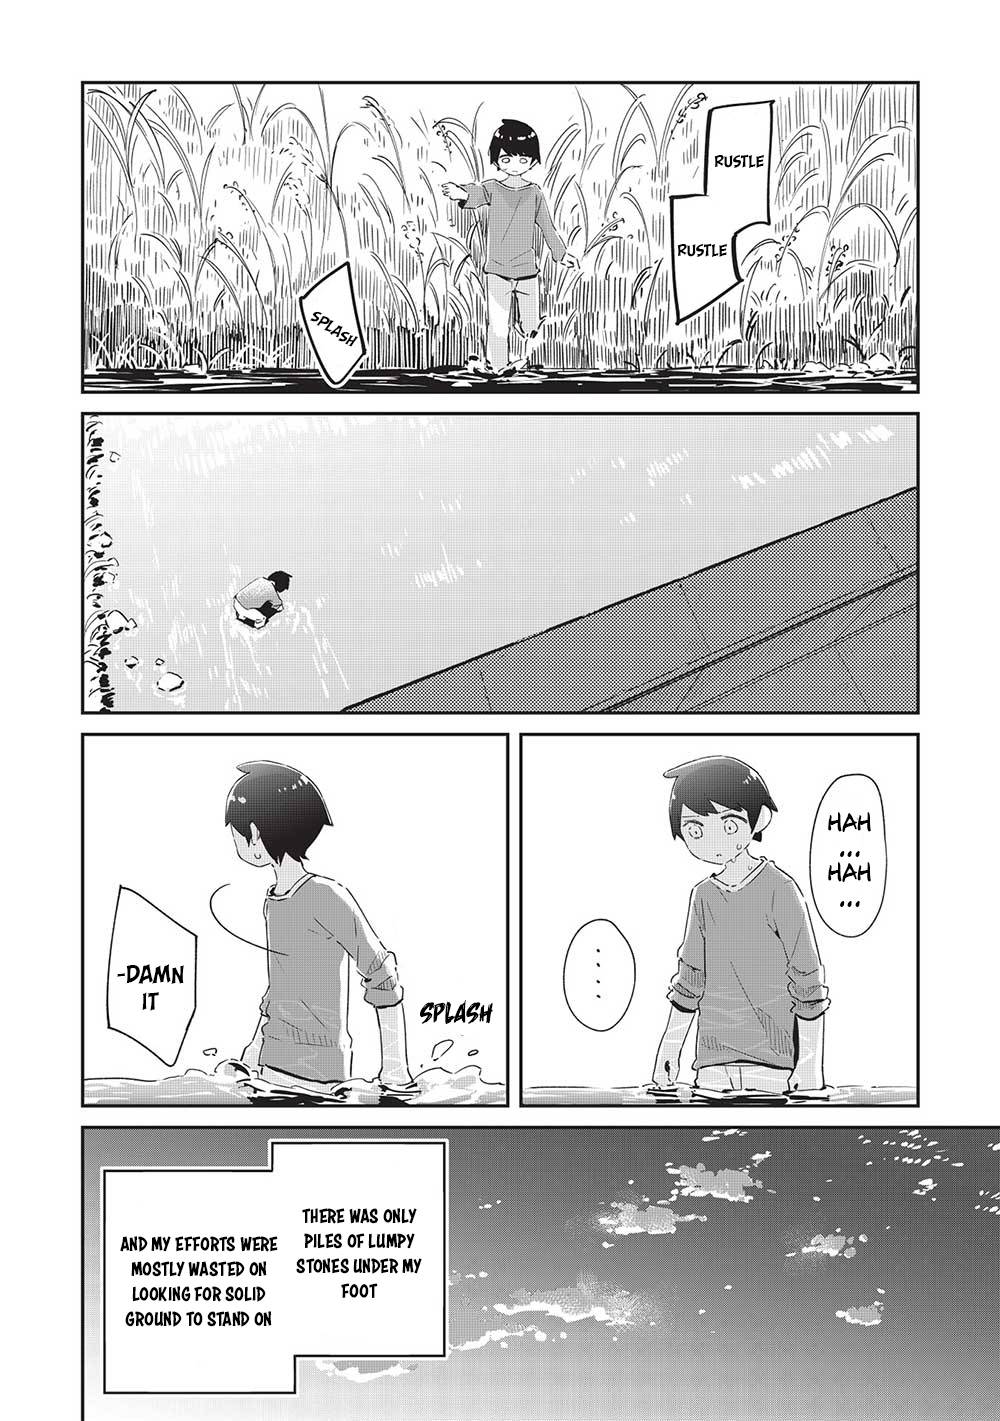 My Tsundere Childhood Friend Is Very Cute - chapter 11.5 - #4